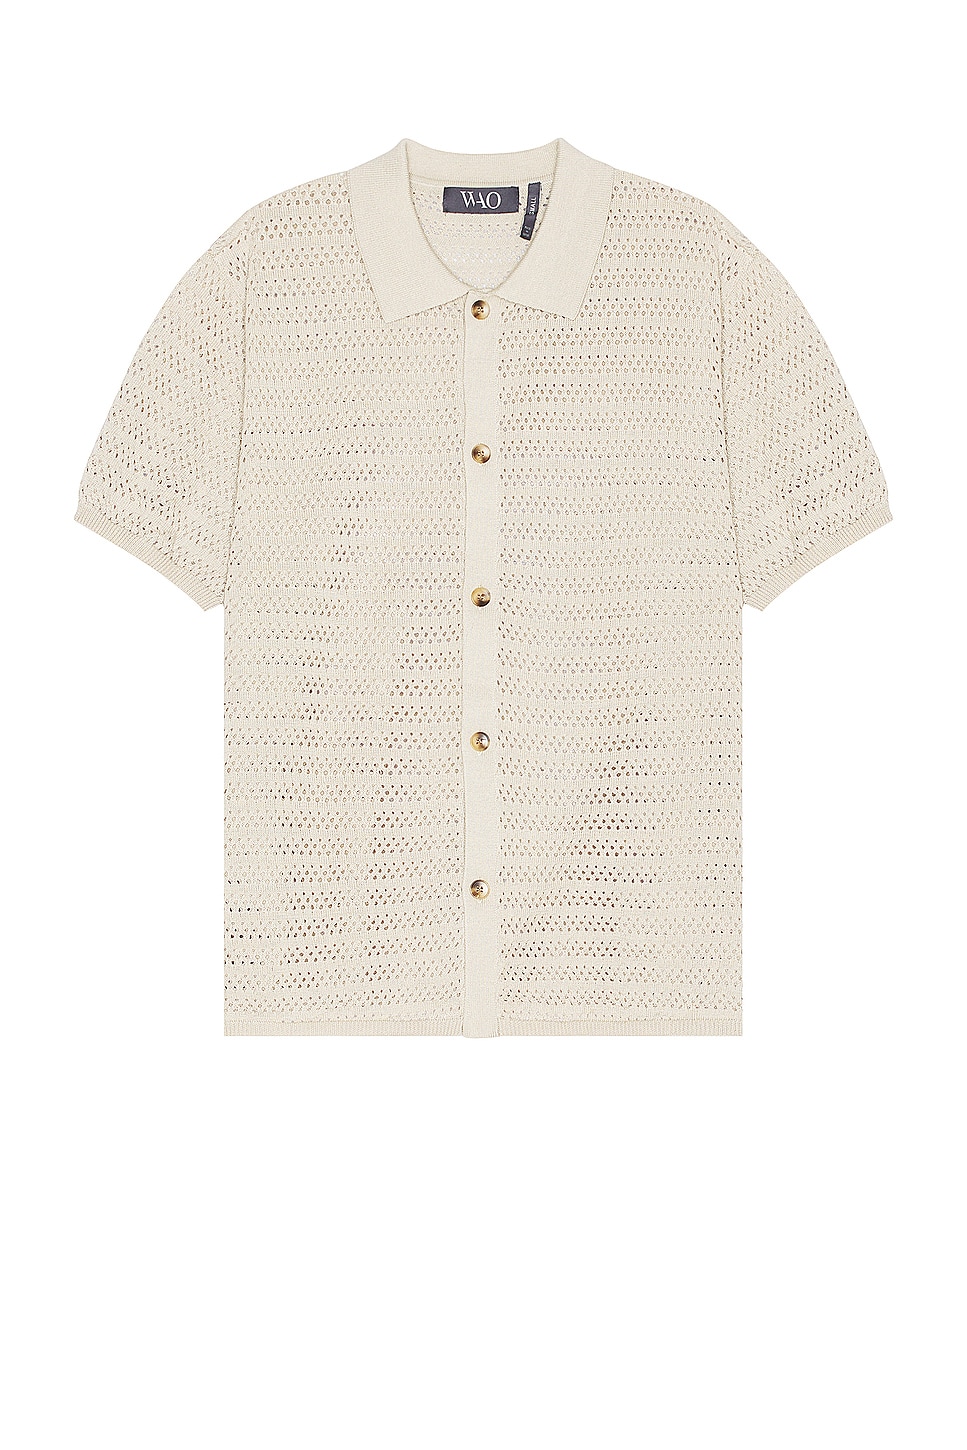 Image 1 of WAO Open Knit Short Sleeve Shirt in Oatmeal